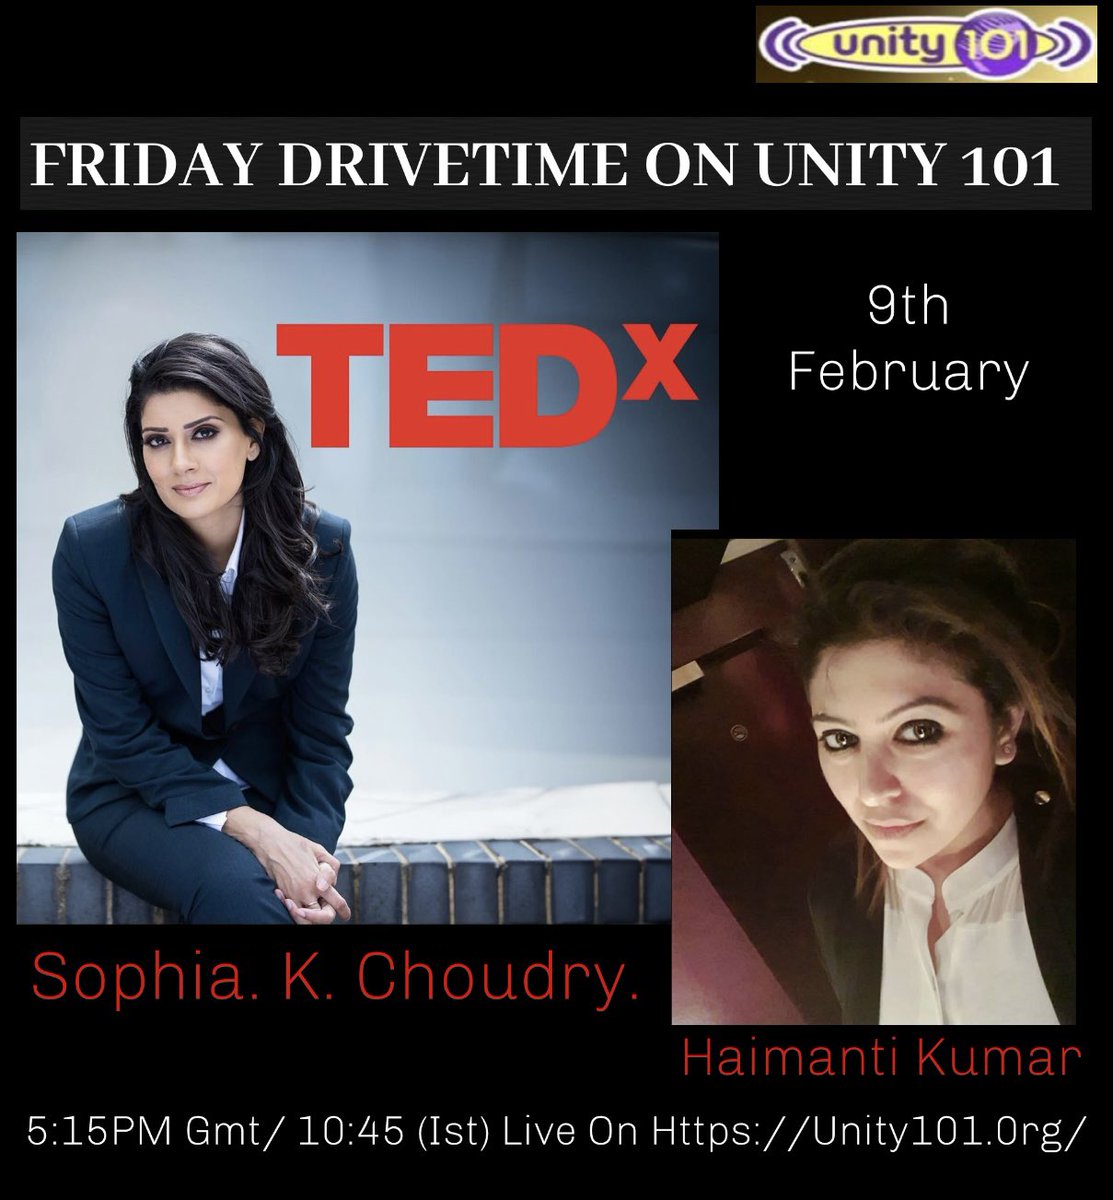 Award Winning Entrepreneur, Creator of @rotiboxofficial solving a common problem in South Asian households, Sophia K Choudry will be joining us tomorrow on @Unity101FM Catch us live at 5:15 pm GMT, 10:45 pm IST on Friday Drivetime #radio #drivetime #rotibox